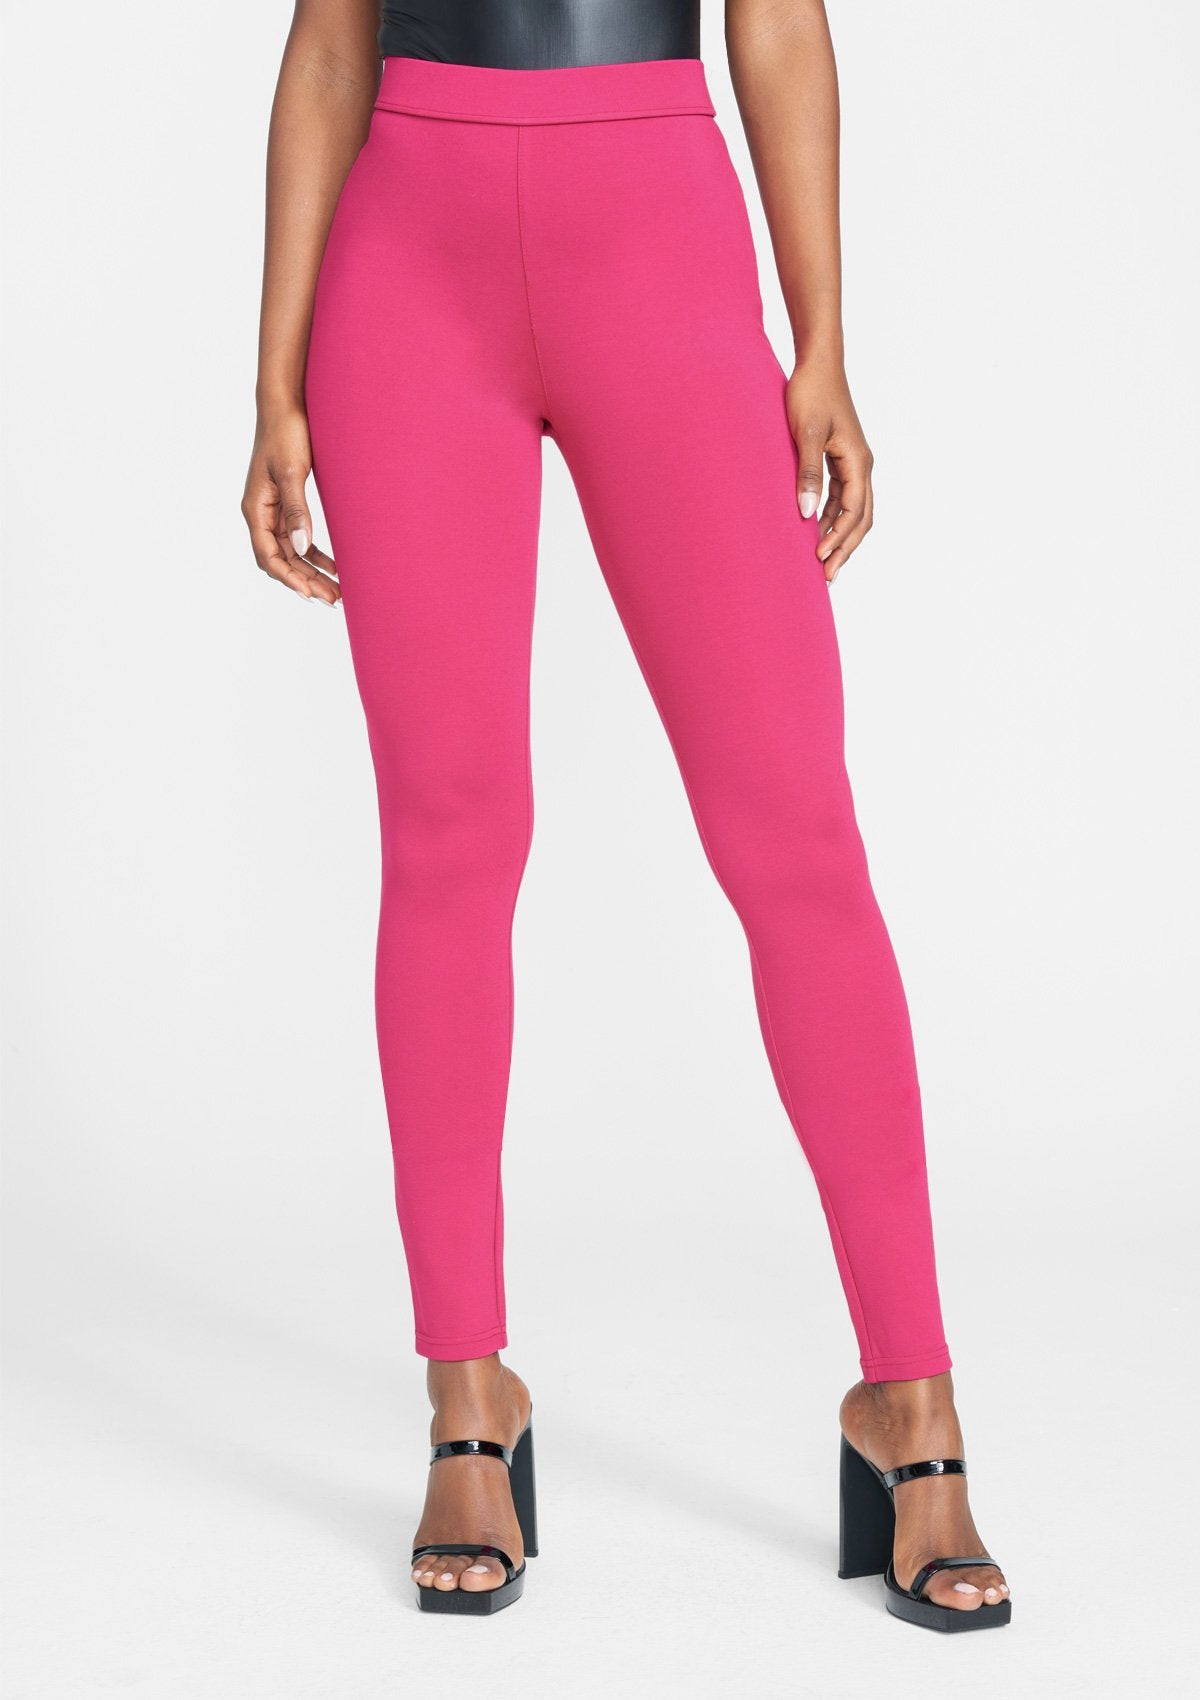 Alloy Apparel Tall Lexi Legging for Women in Magenta Size S length 37 | Polyester